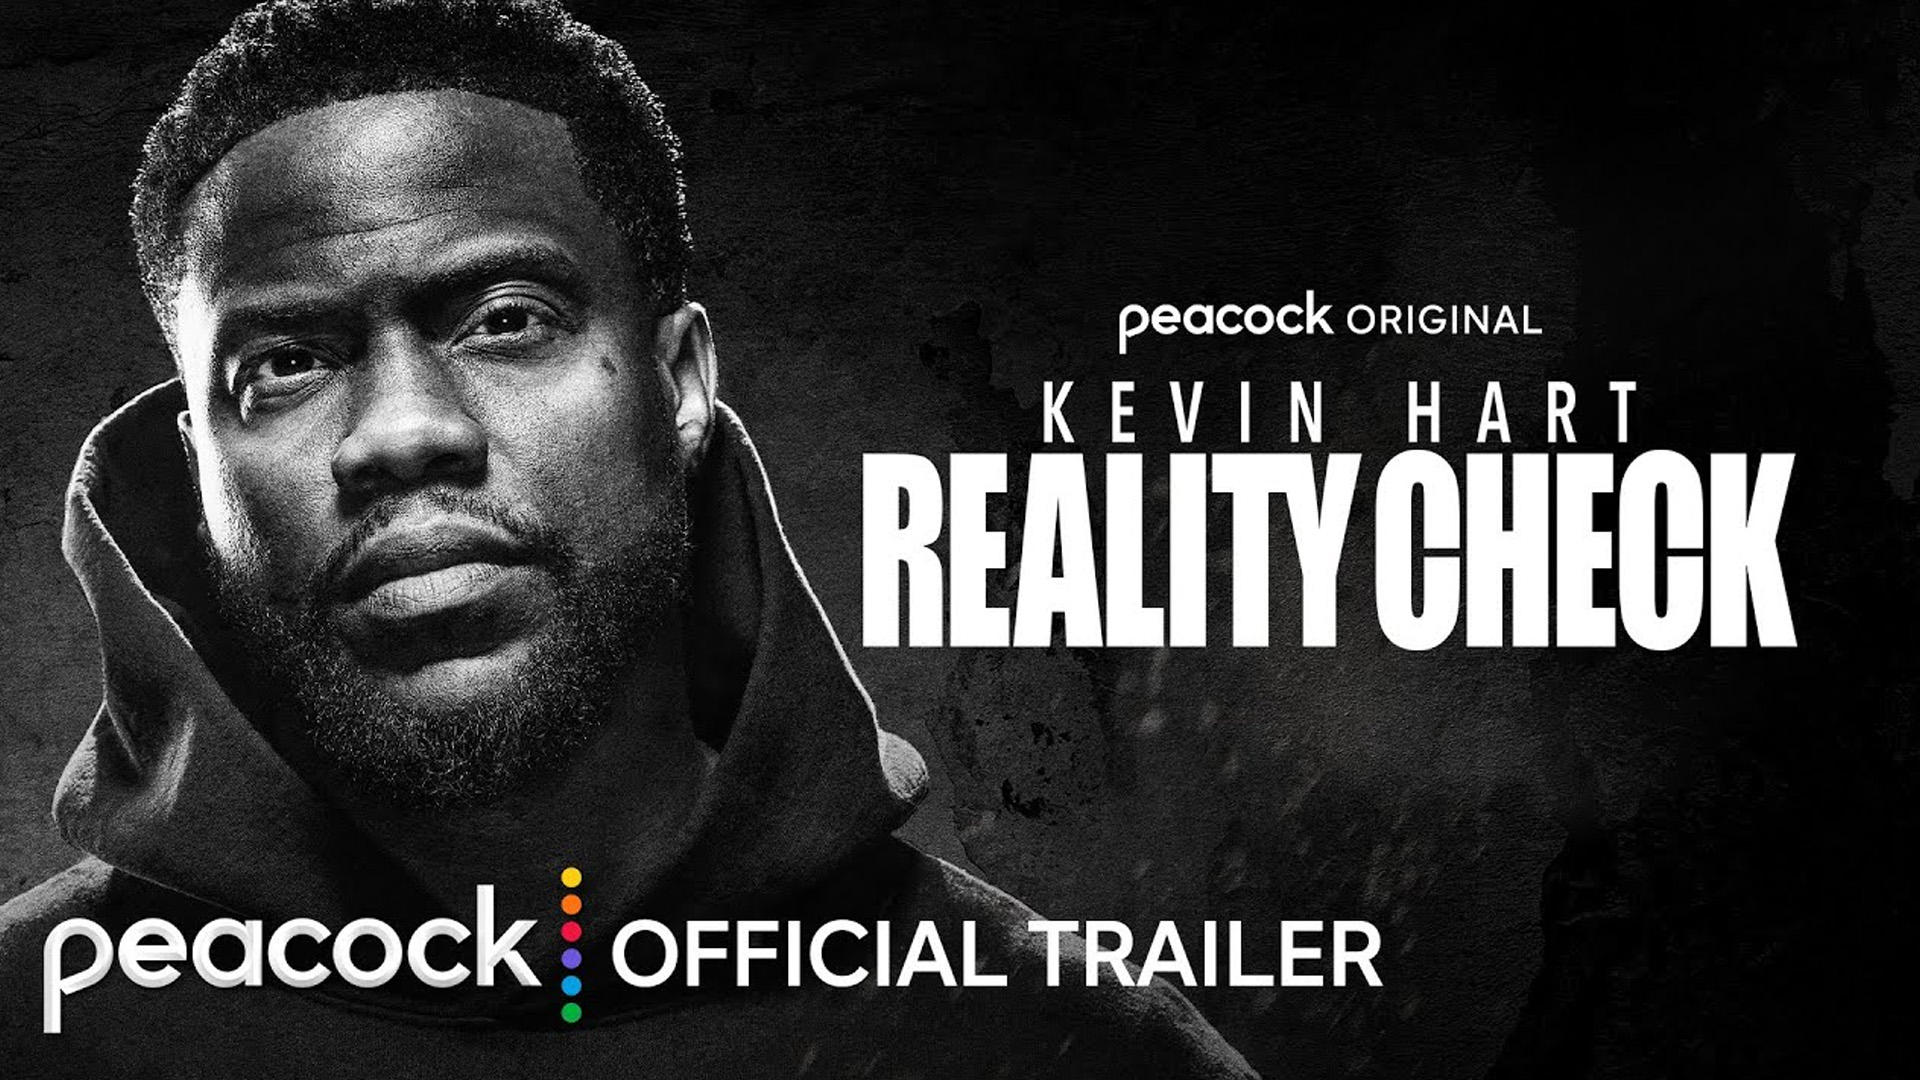 Kevin Hart Reality Check Confirm Peacock Release Date.